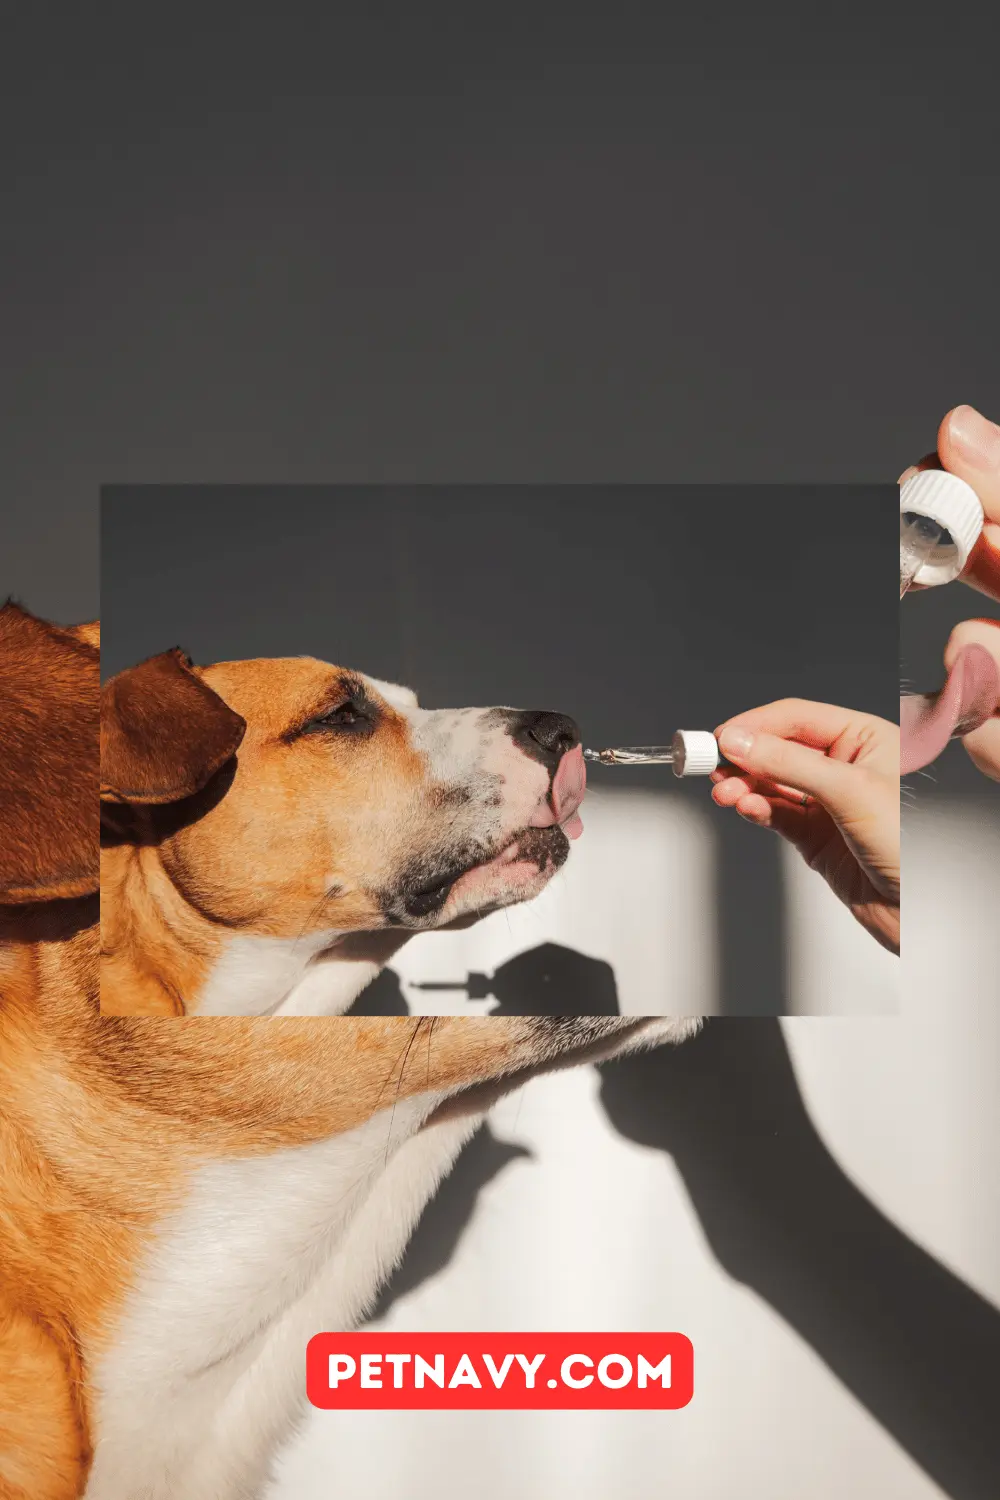 Joint Supplements for Dogs Uses, Side Effects and More